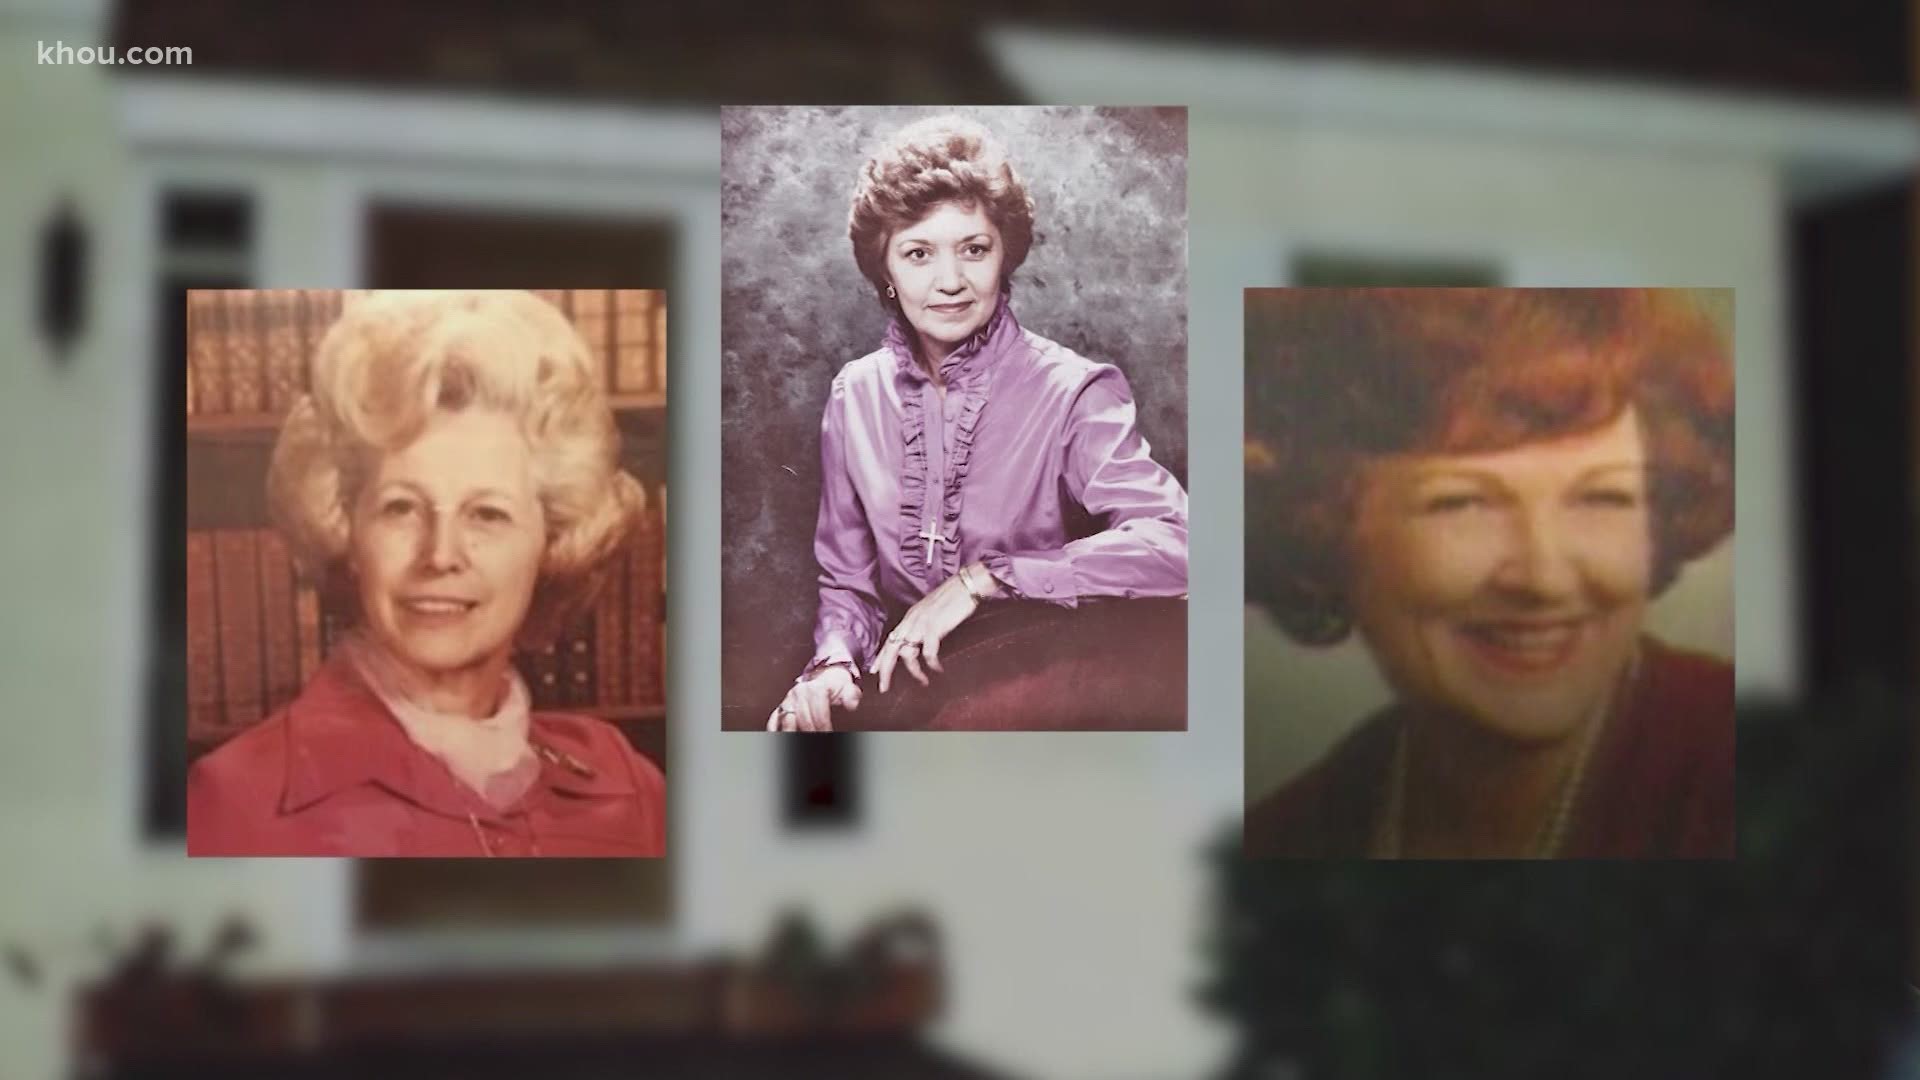 3 women were shot in the head inside a real estate office the day after Hurricane Alicia hit in 1983, but now an increased reward is getting the case new attention.